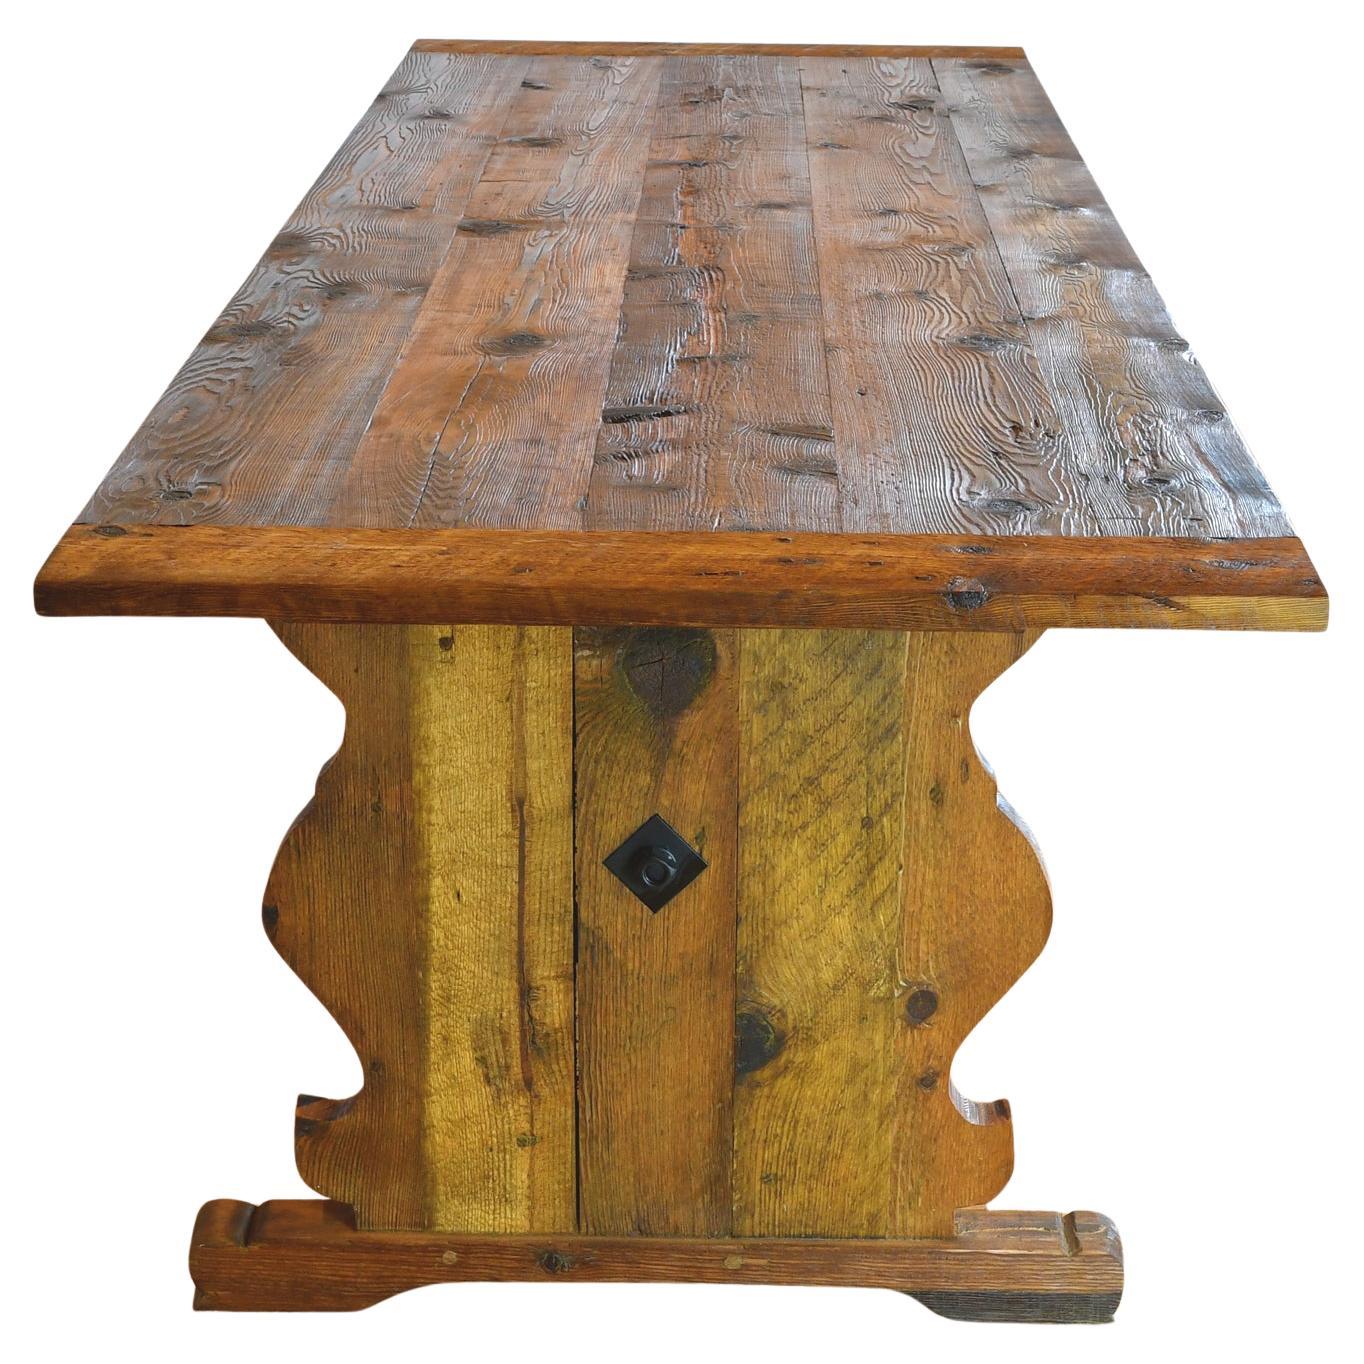 Hand-Crafted 10' long Swedish Farm Table Made From Repurposed Douglas Fir & Ponderosa Pine For Sale